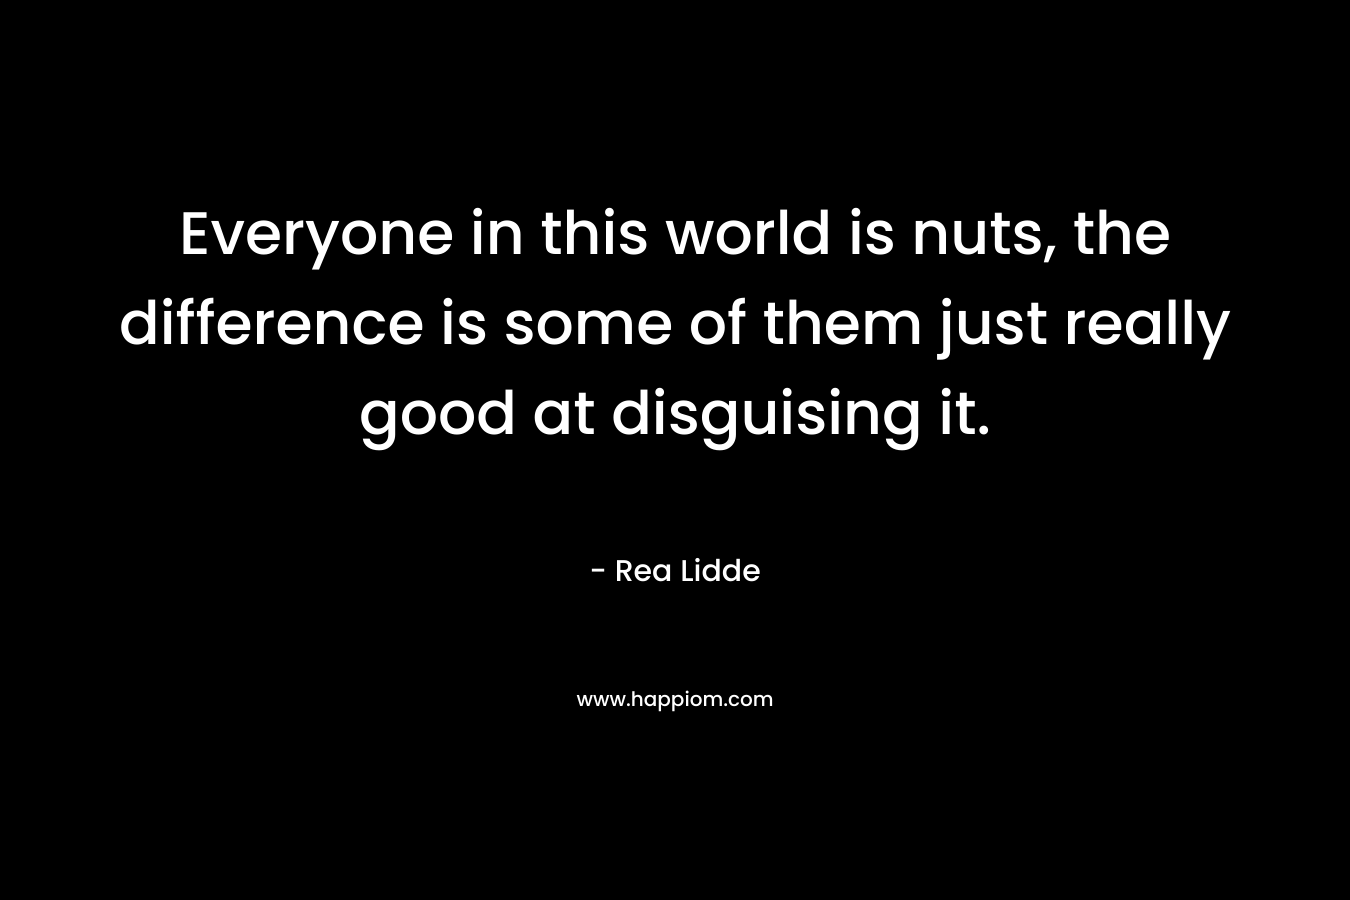 Everyone in this world is nuts, the difference is some of them just really good at disguising it. – Rea Lidde